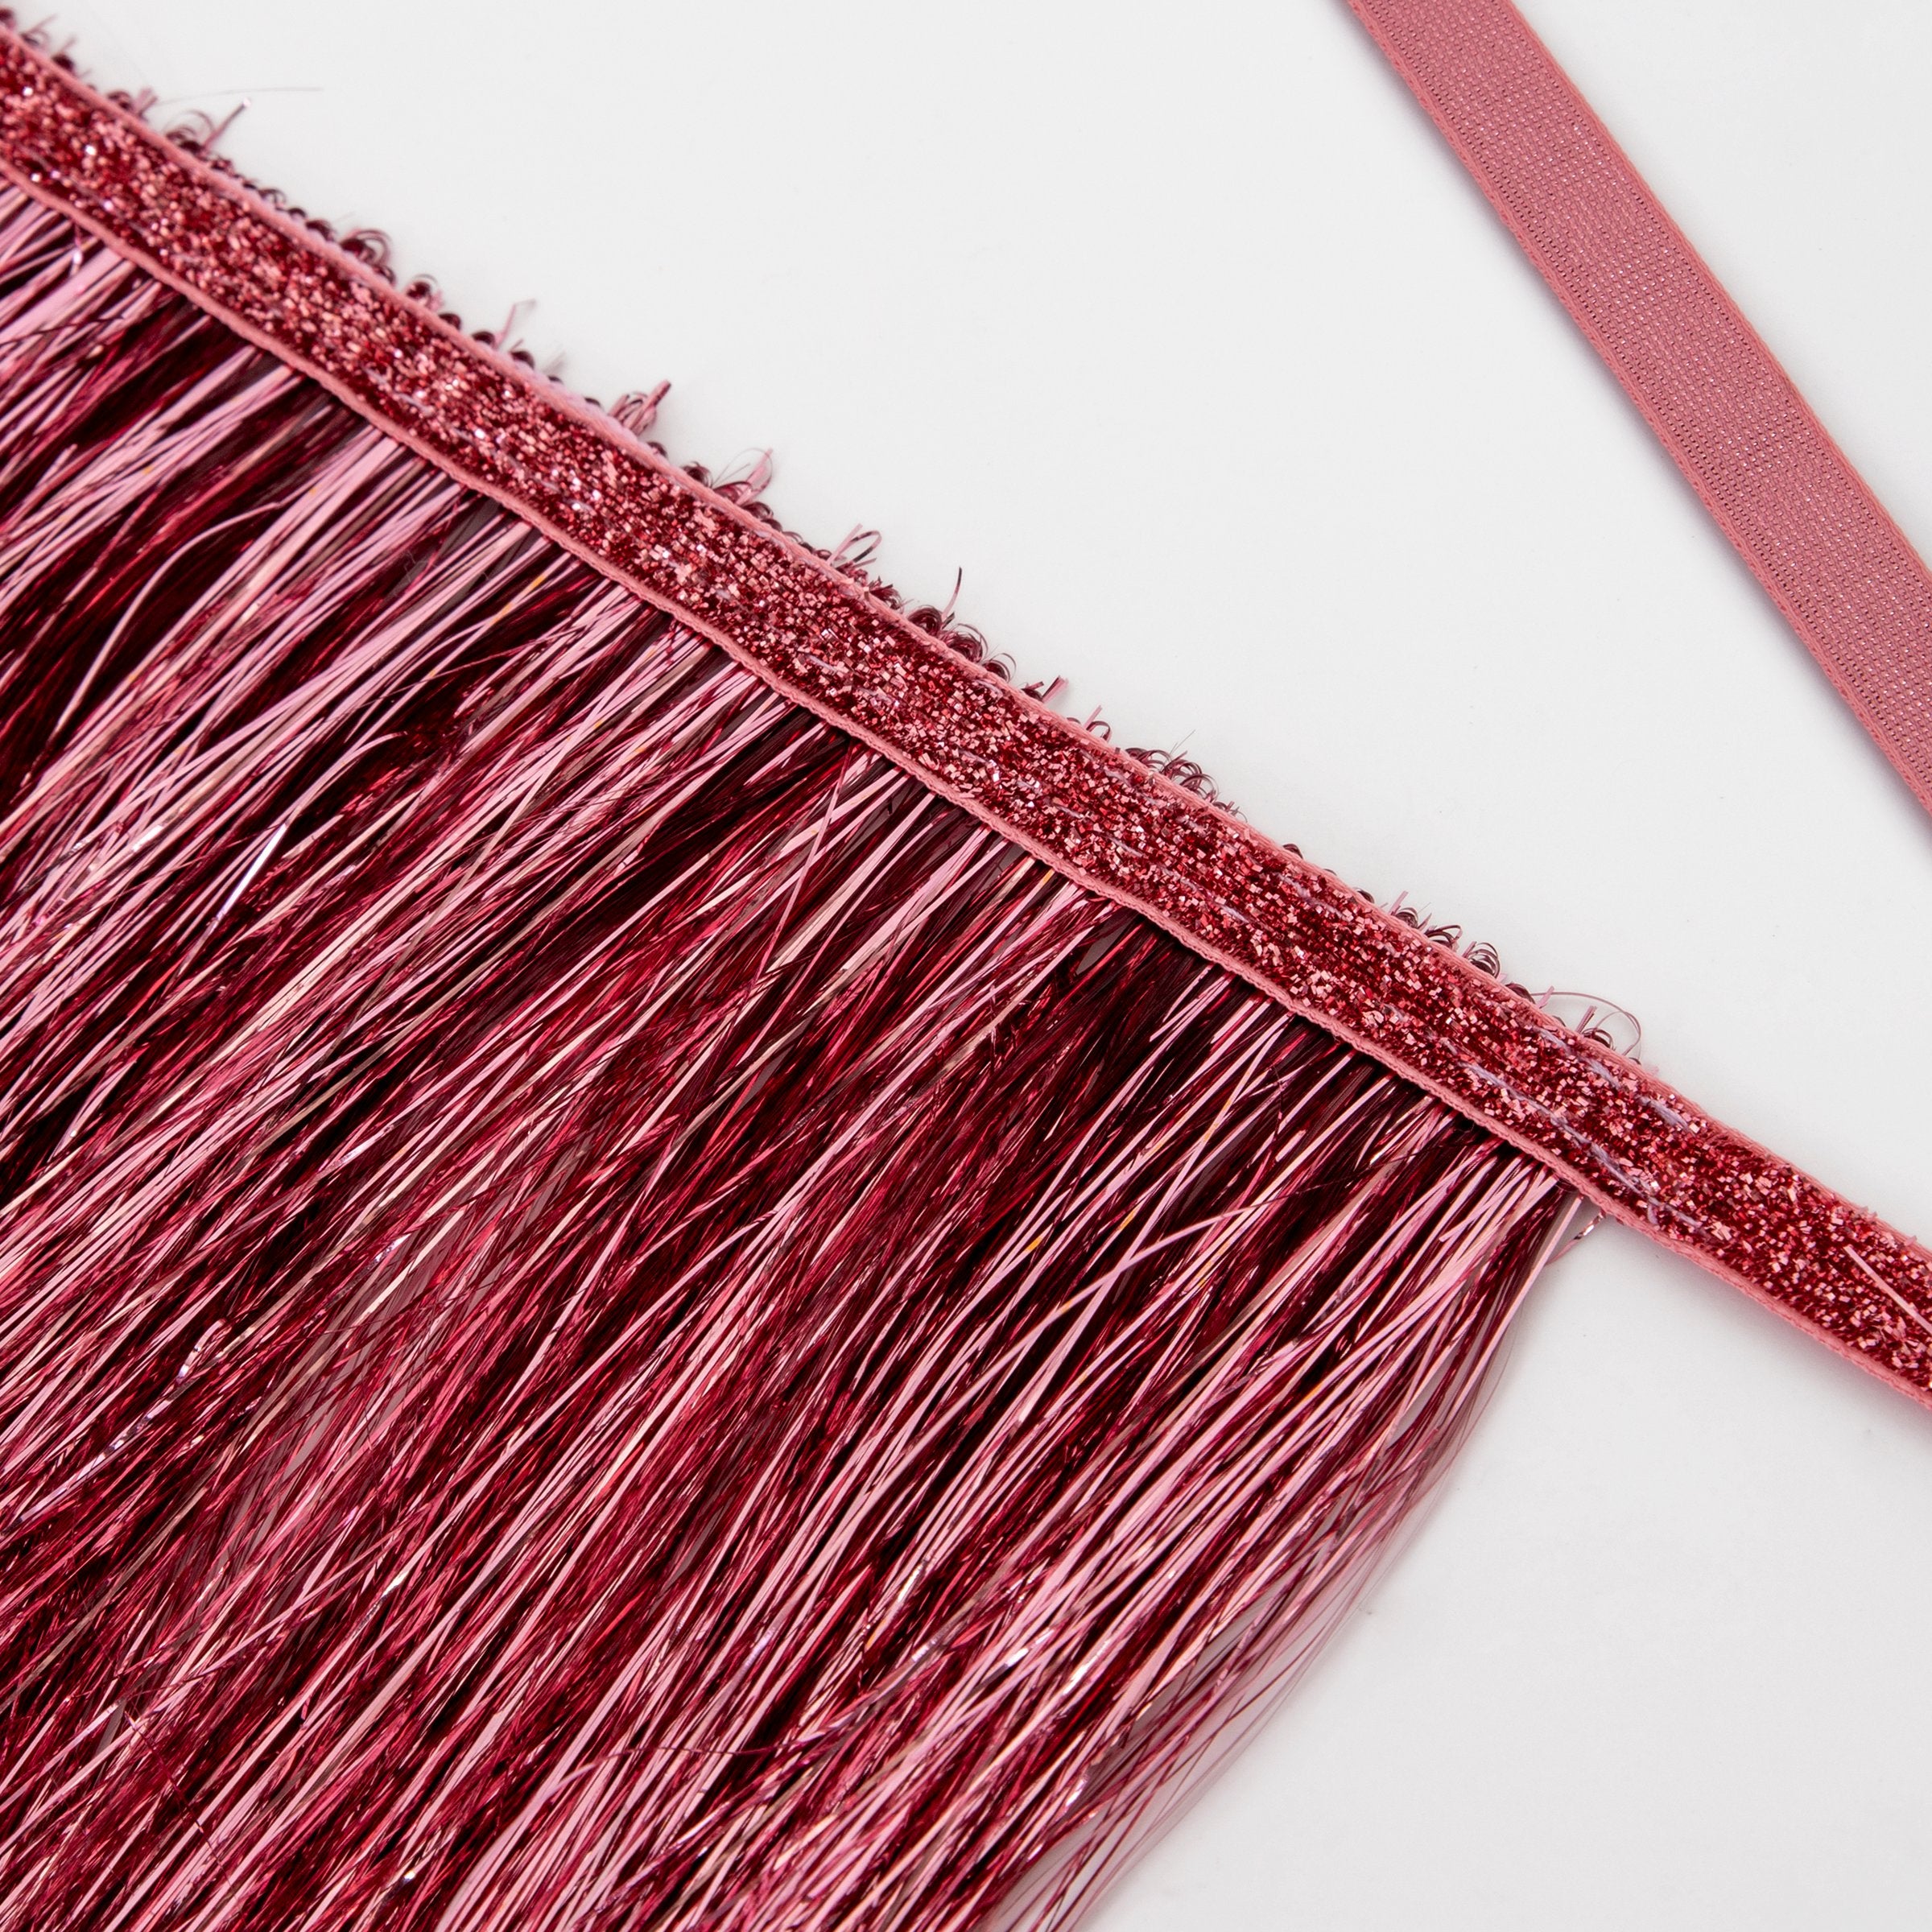 Our long tinsel garland is perfect to add a touch of shimmering pink to any party.